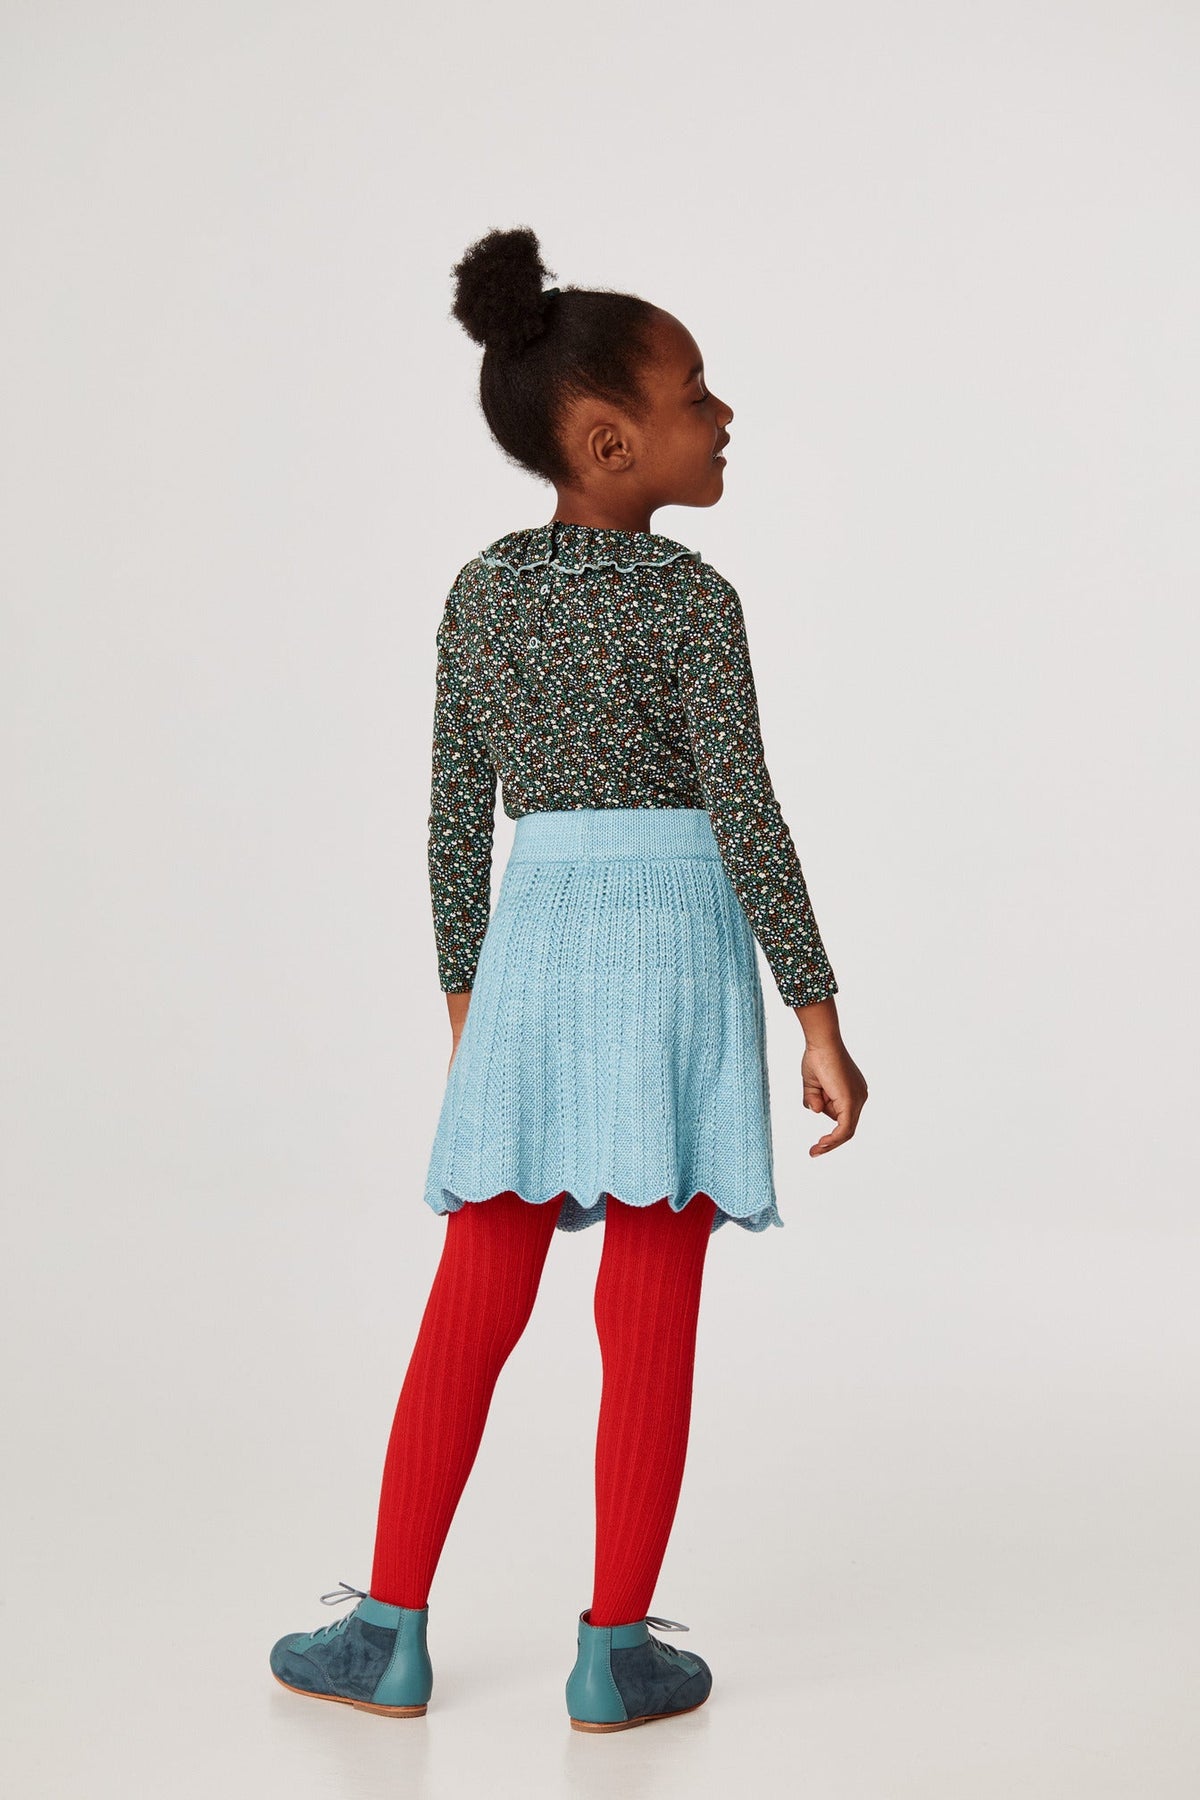 Chevron Skirt - Faded Denim+Model is 49 inches tall, 46lbs, wearing a size 6-7y